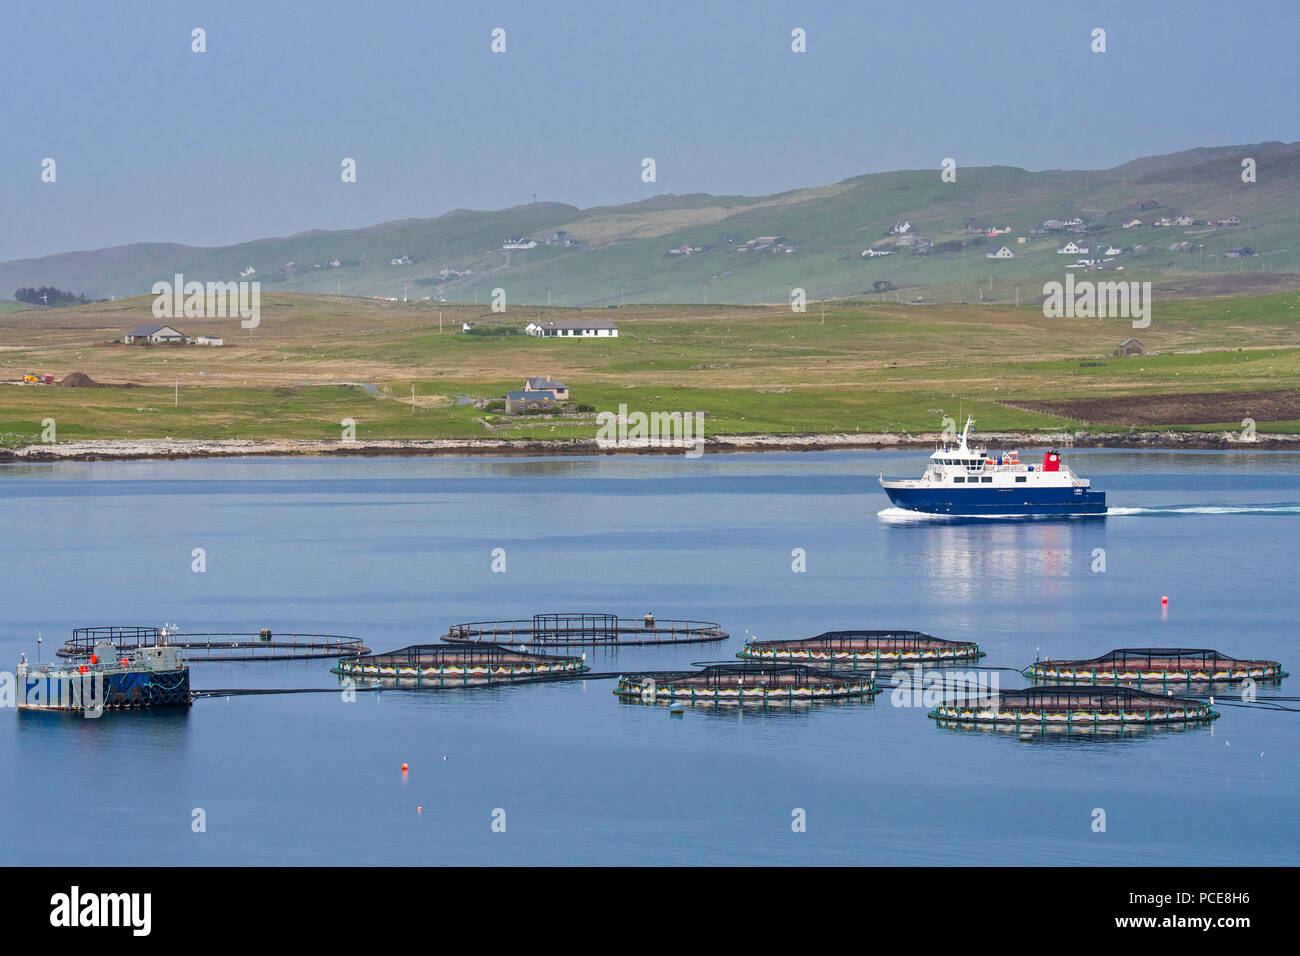 Ferry boat Linga sailing past sea cages / sea pens / fish cages from salmon farm in Laxo Voe, Vidlin on the Mainland, Shetland Islands, Scotland, UK Stock Photo